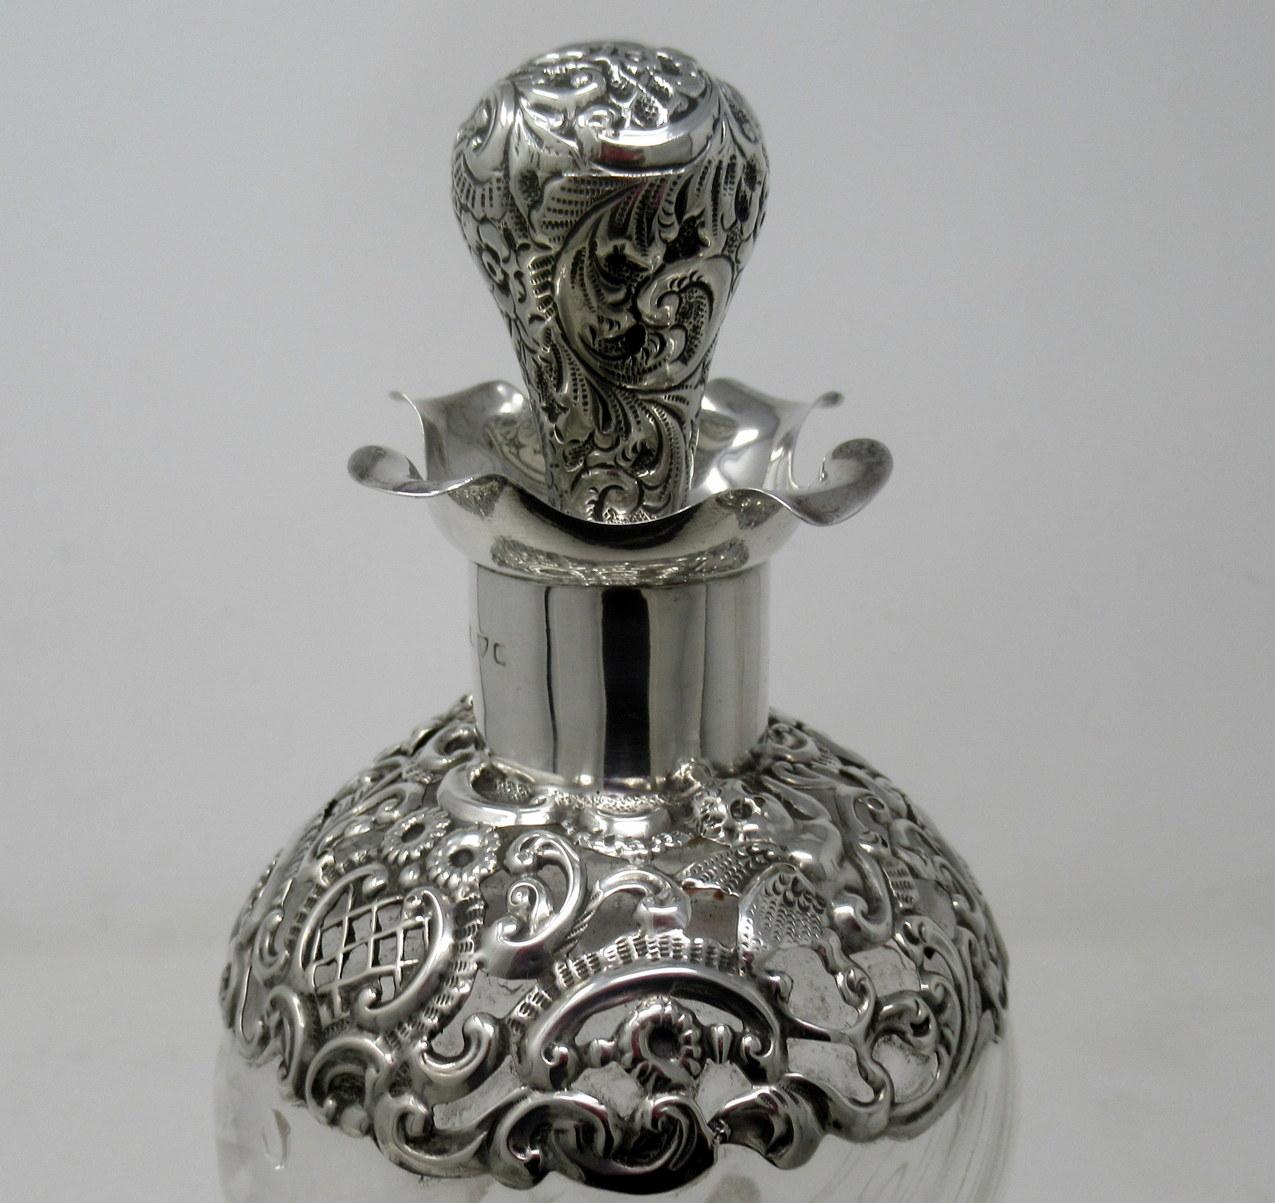 English Pair of Full Lead Crystal Hallmark Sterling Silver Spirits Wine Decanters, 1899